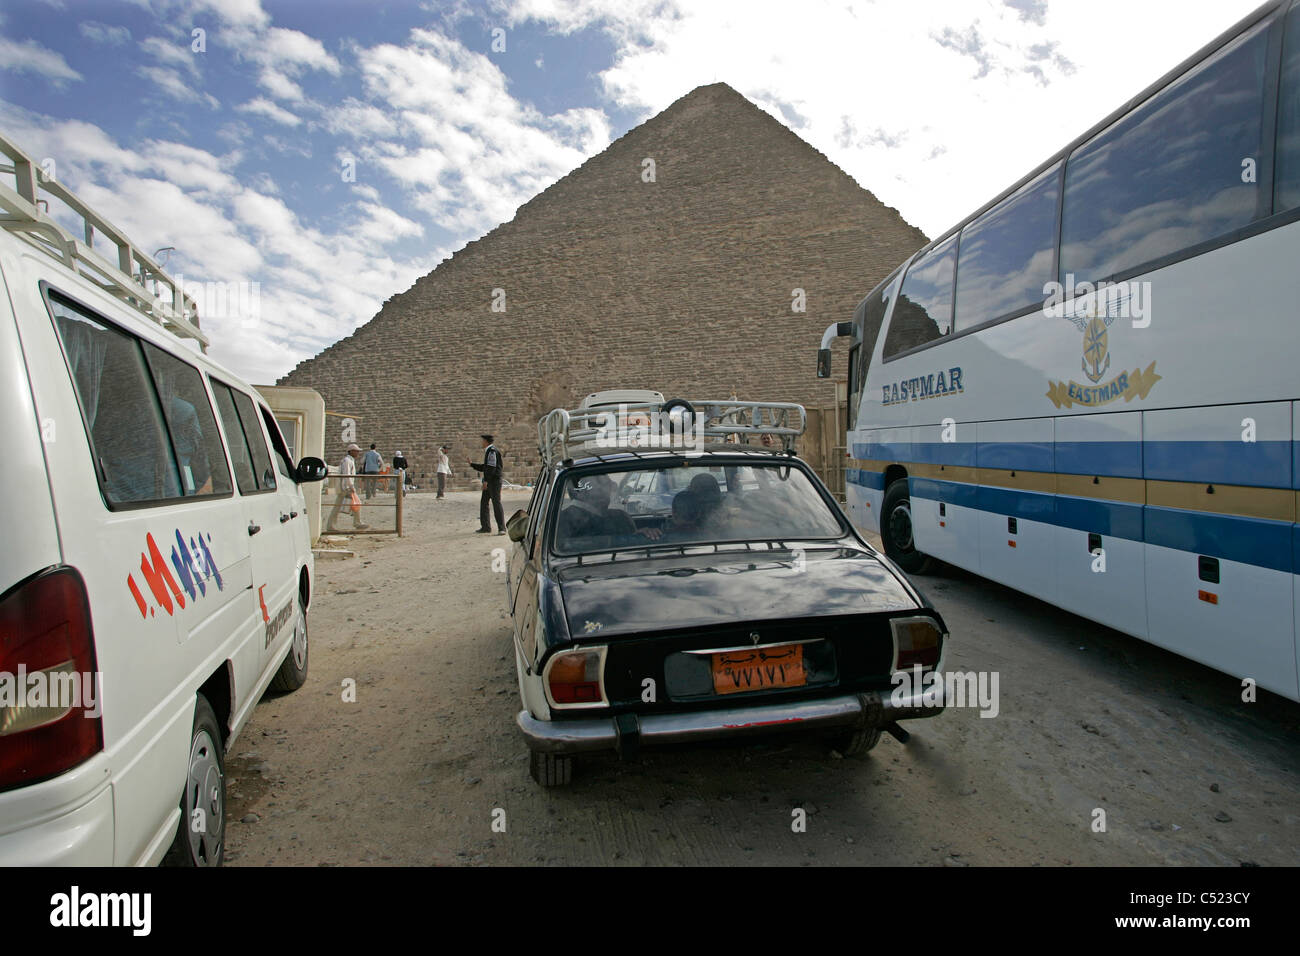 Buses and car parked next to the Great Pyramid of Khufu on the Giza plateau, Egypt Stock Photo